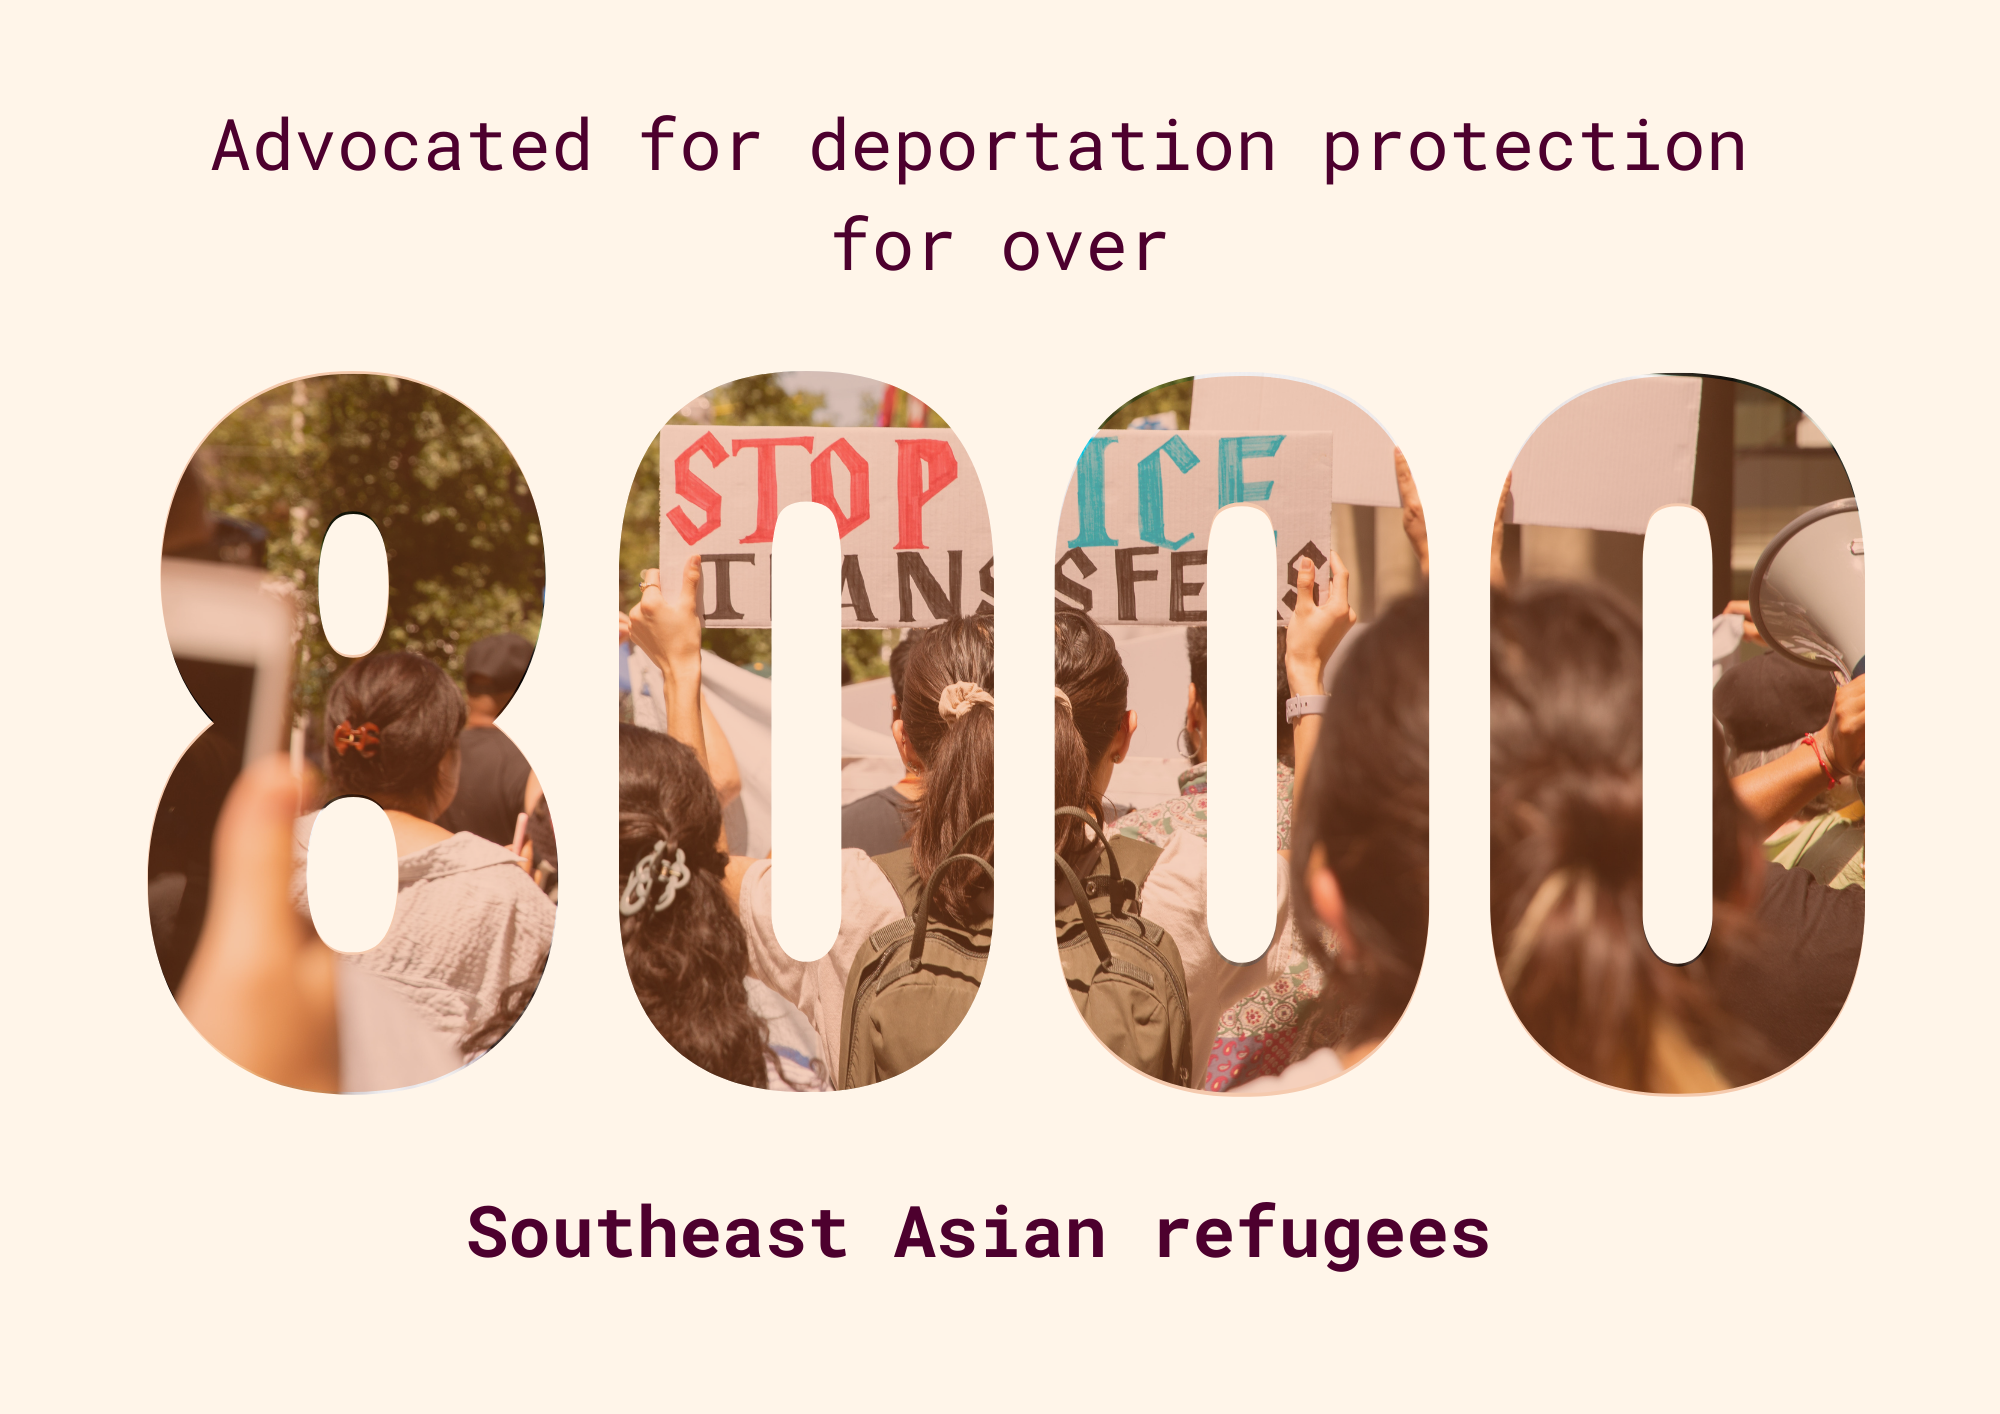 ALC advocated for deportation protection for over 8,000 Southeast Asian refugees.